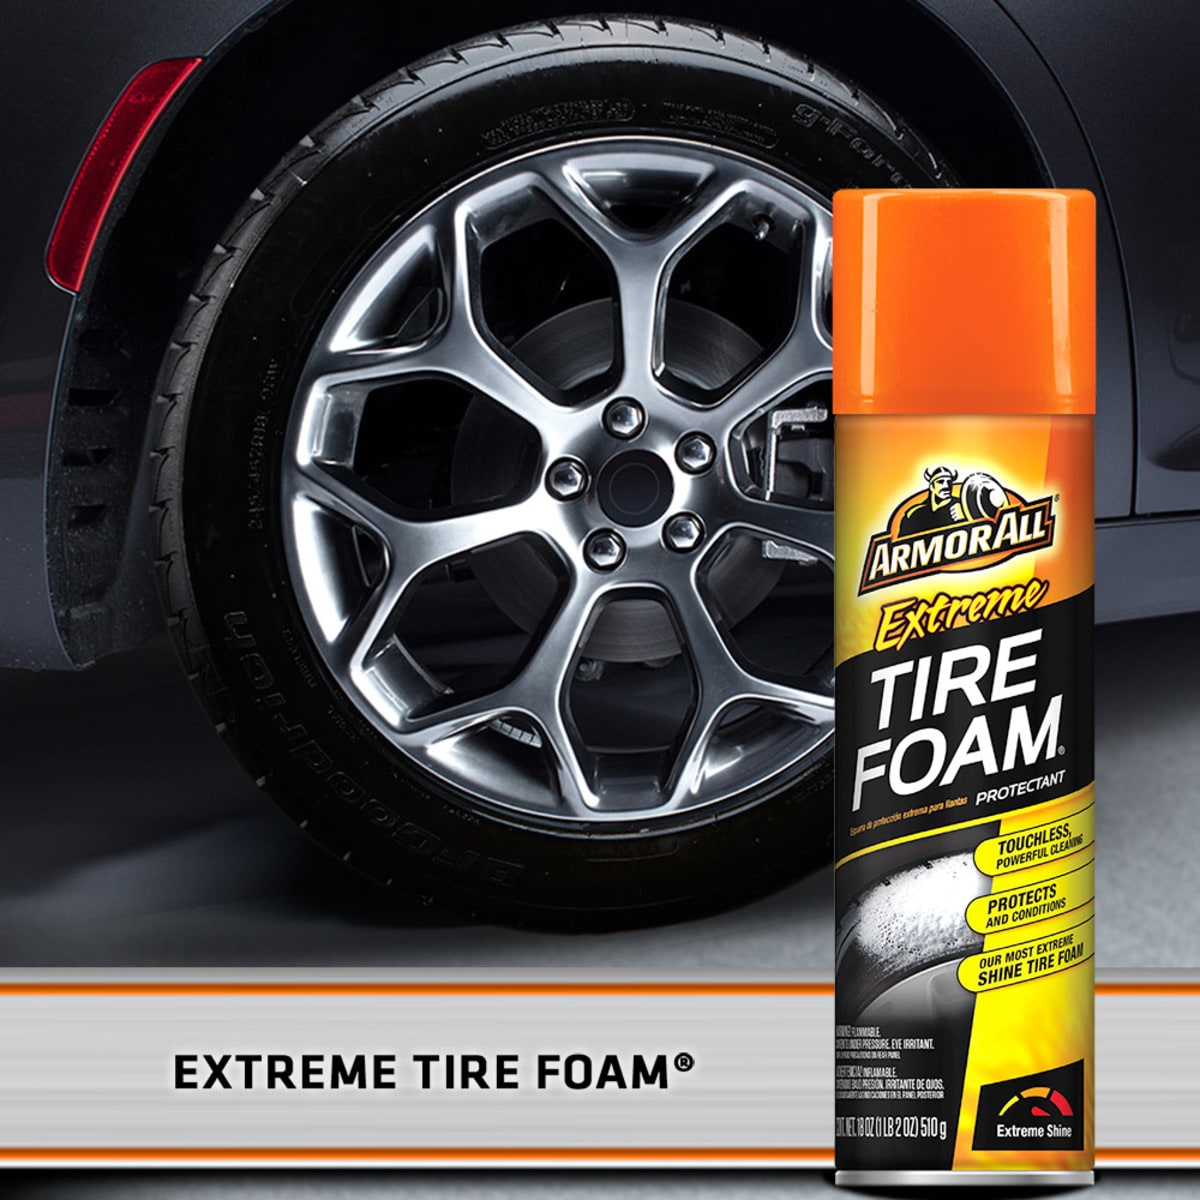 Armorall Tire Foam 4 Oz - 1 count only